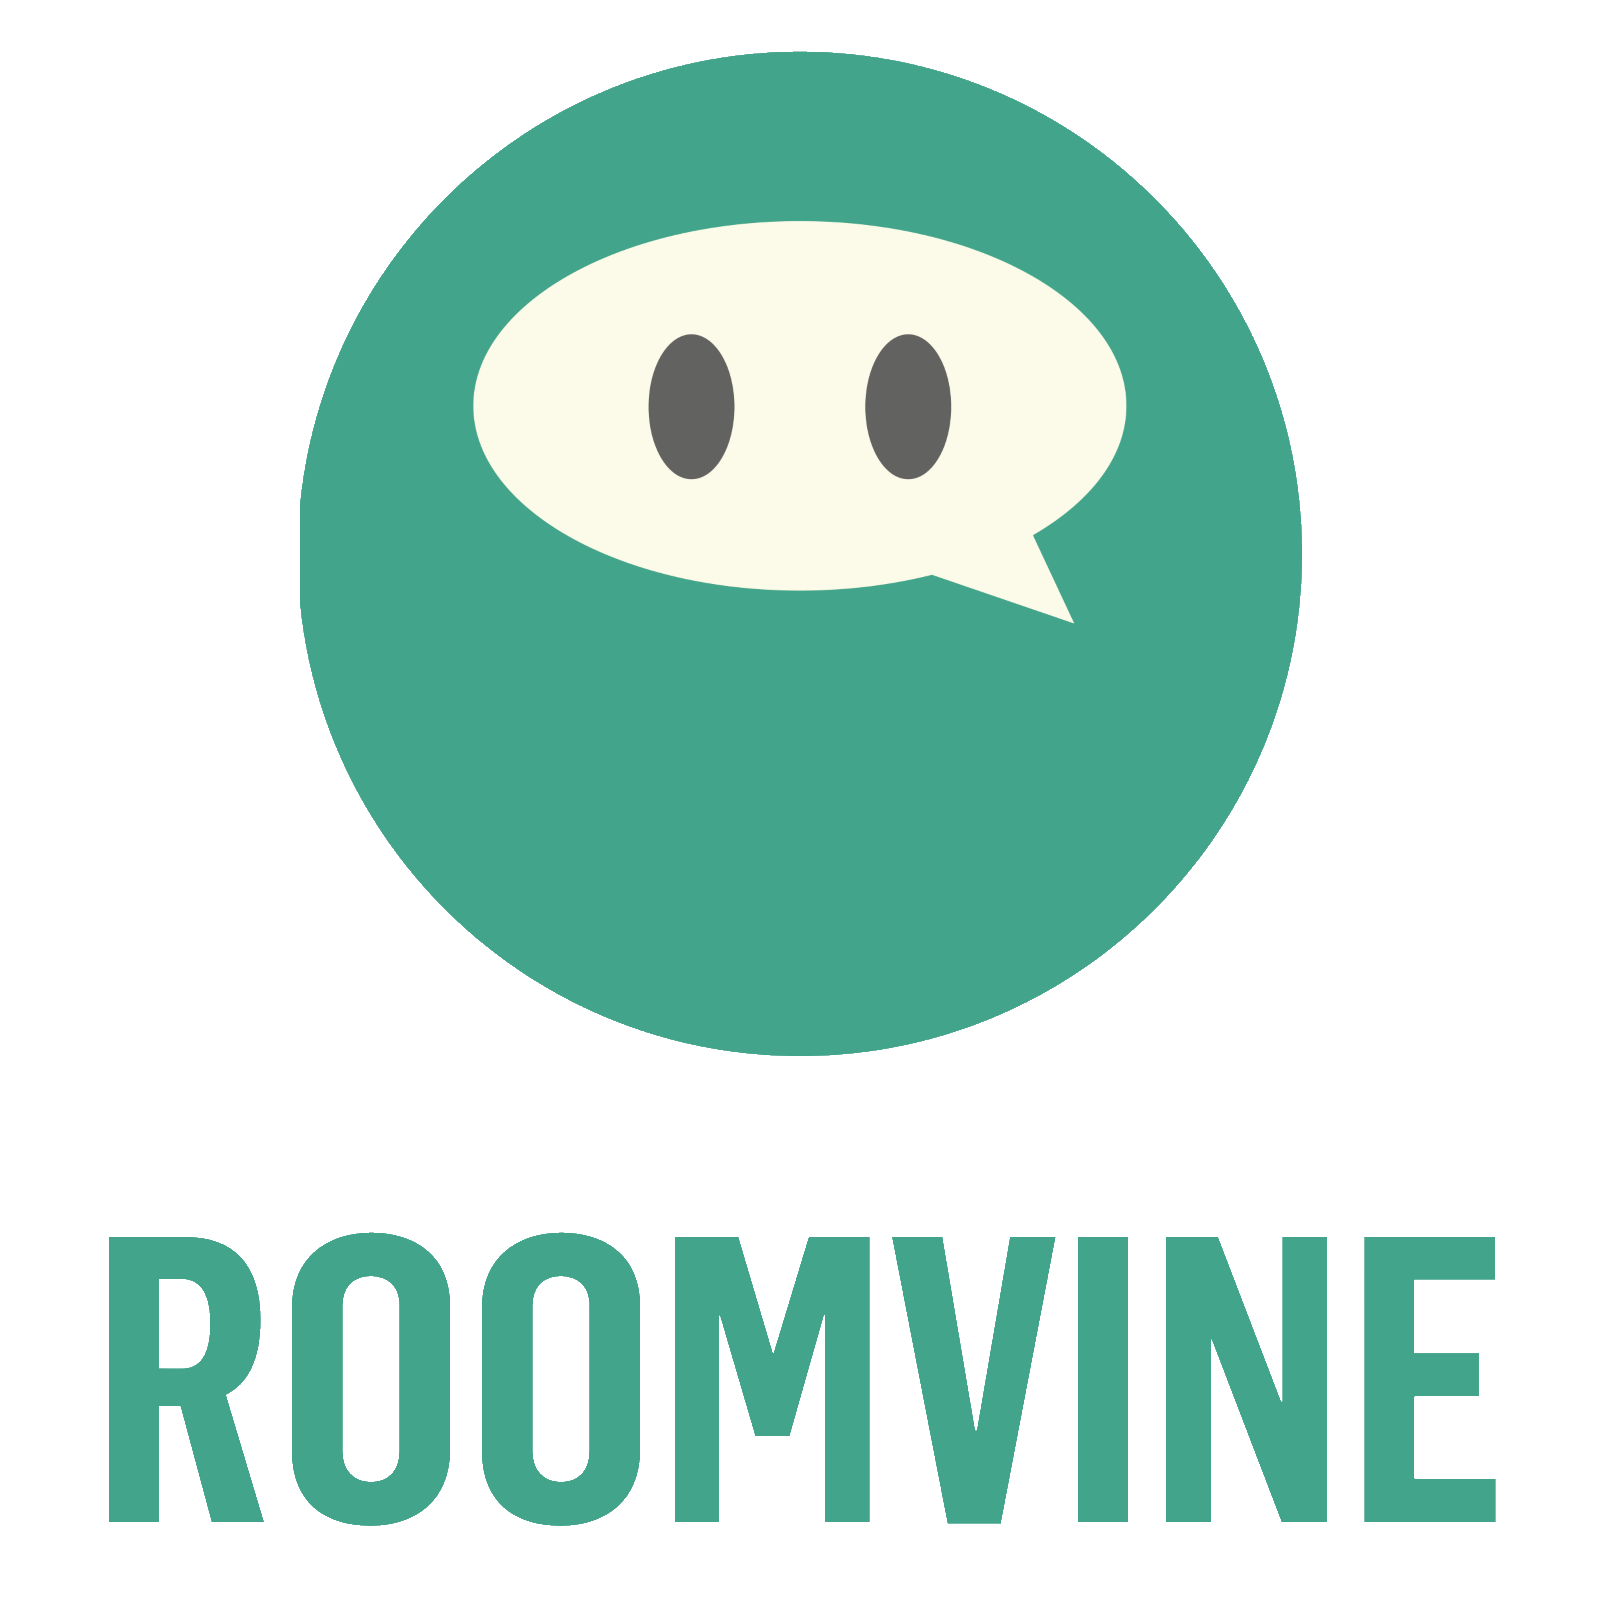 Roomvine: Chatrooms for real life